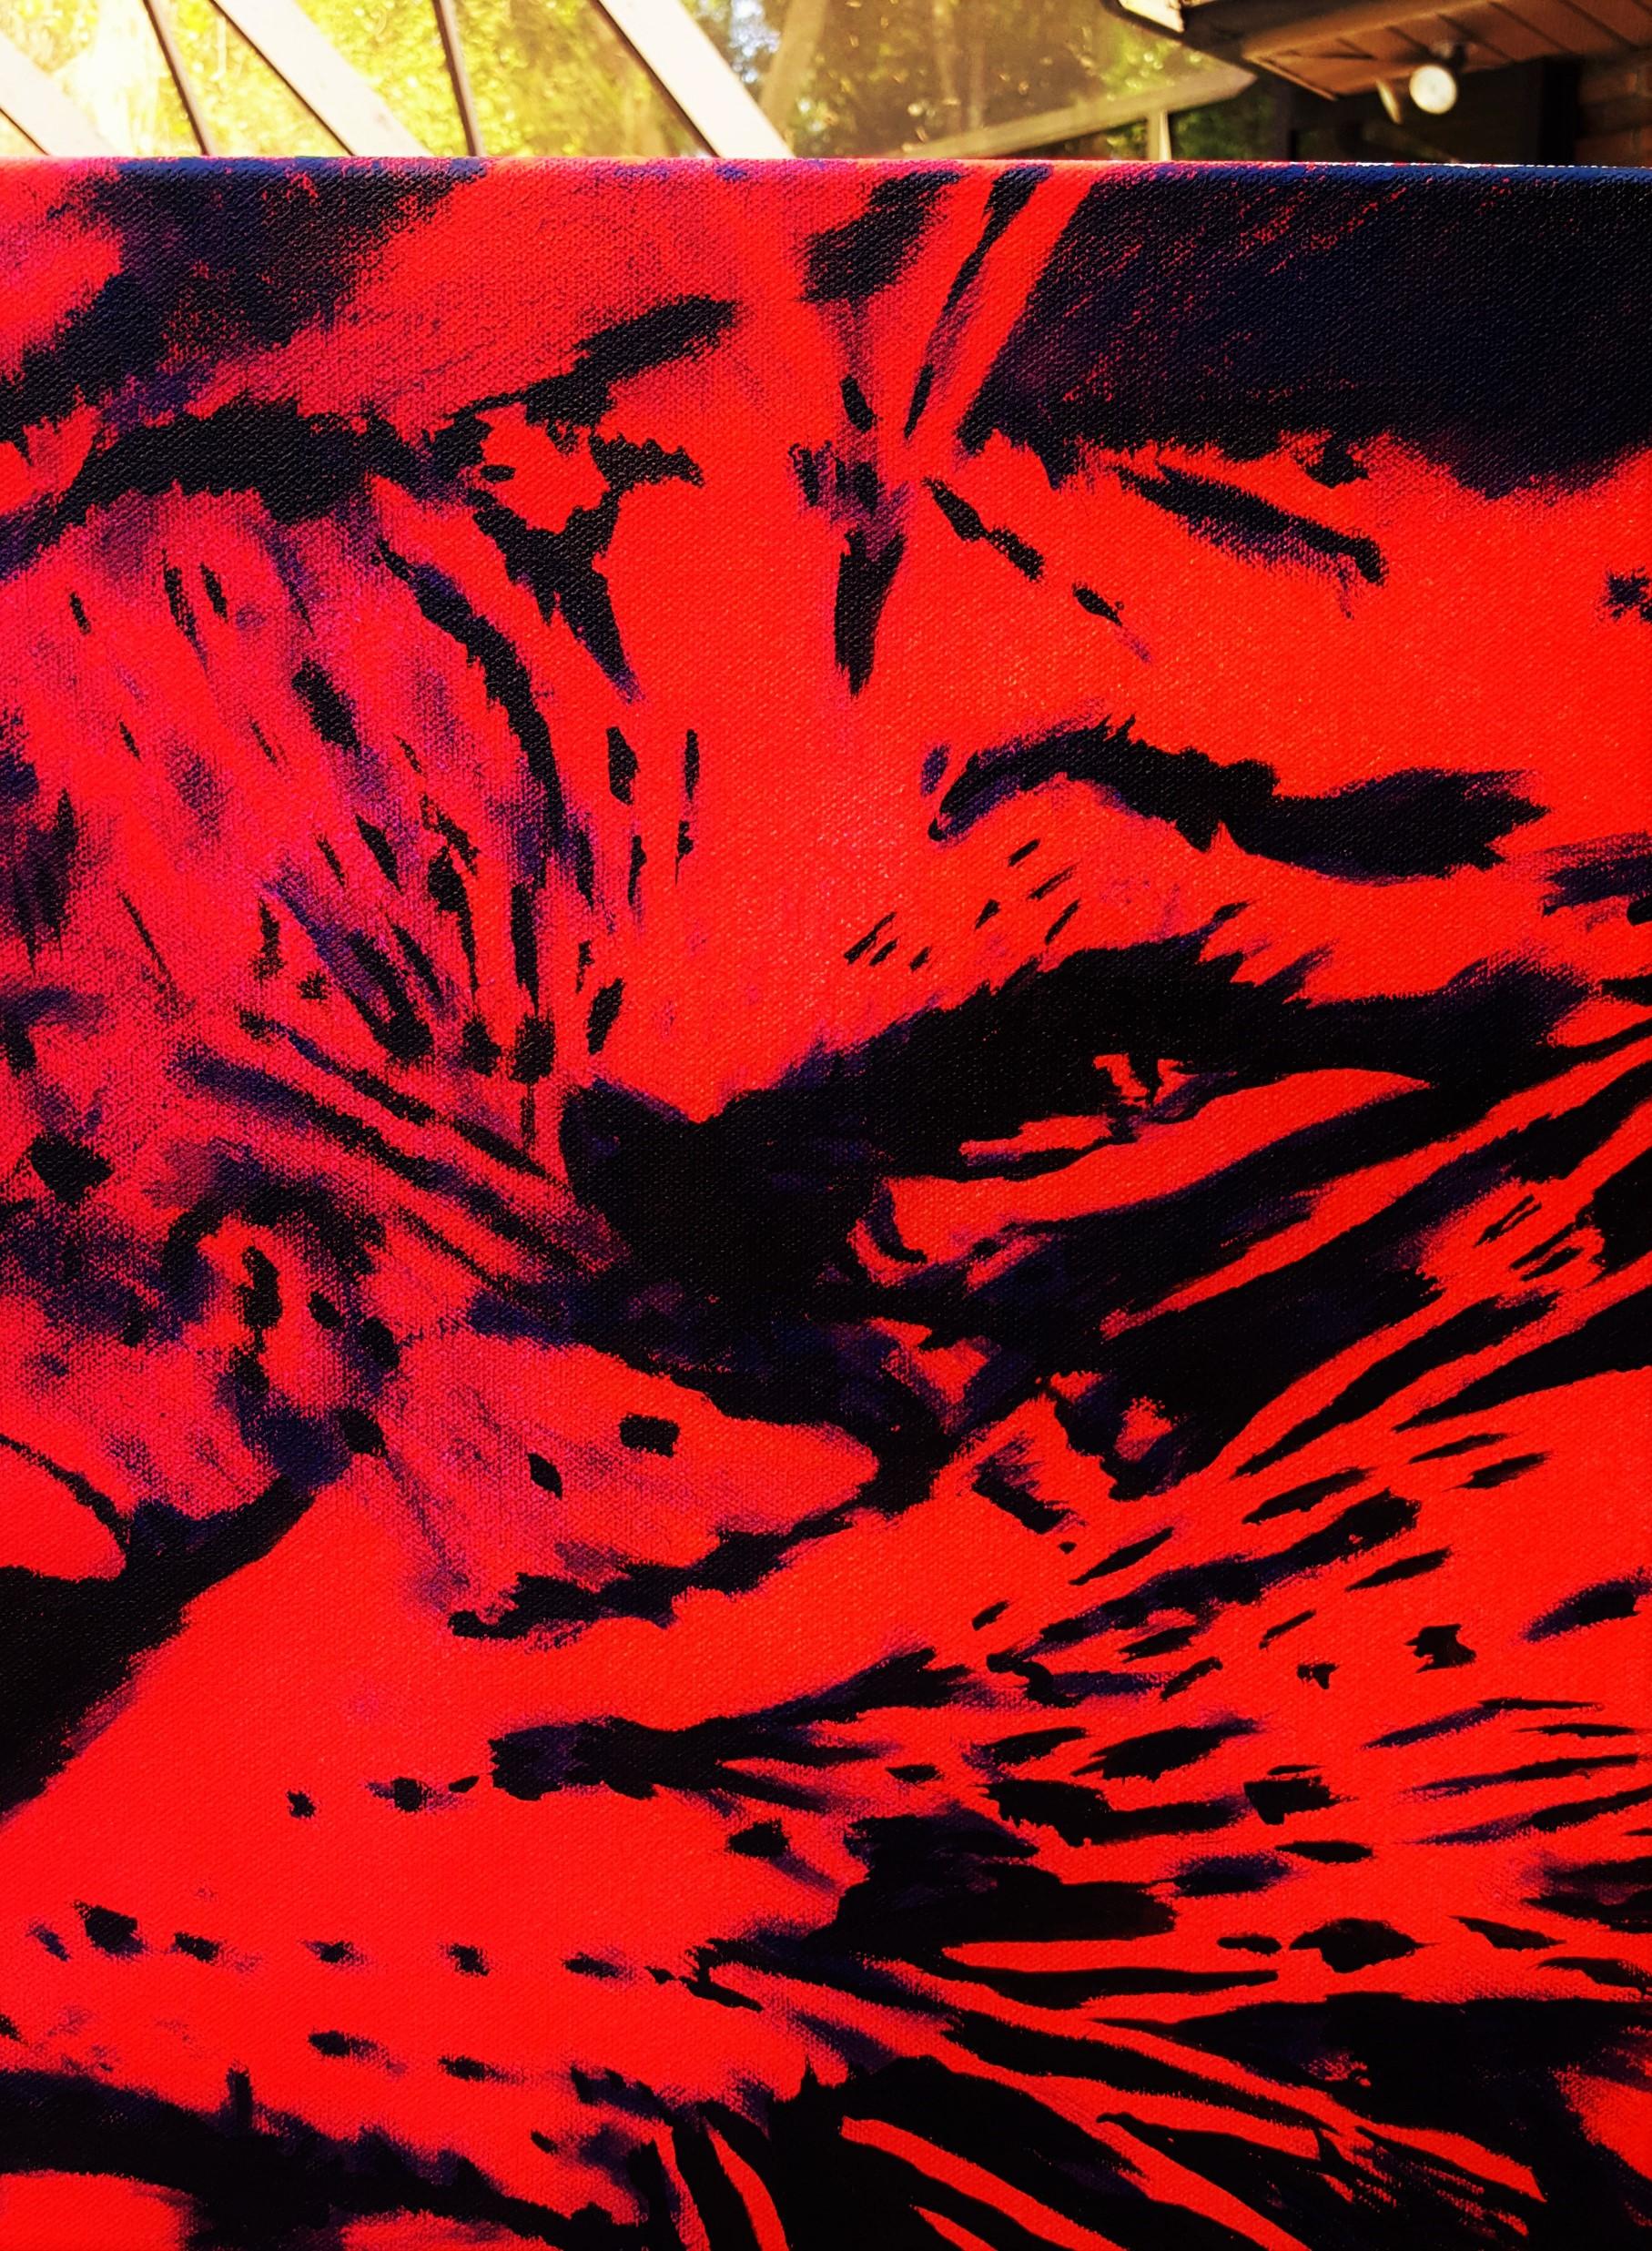 Tiger Icon - Red Animal Painting by Jack Graves III